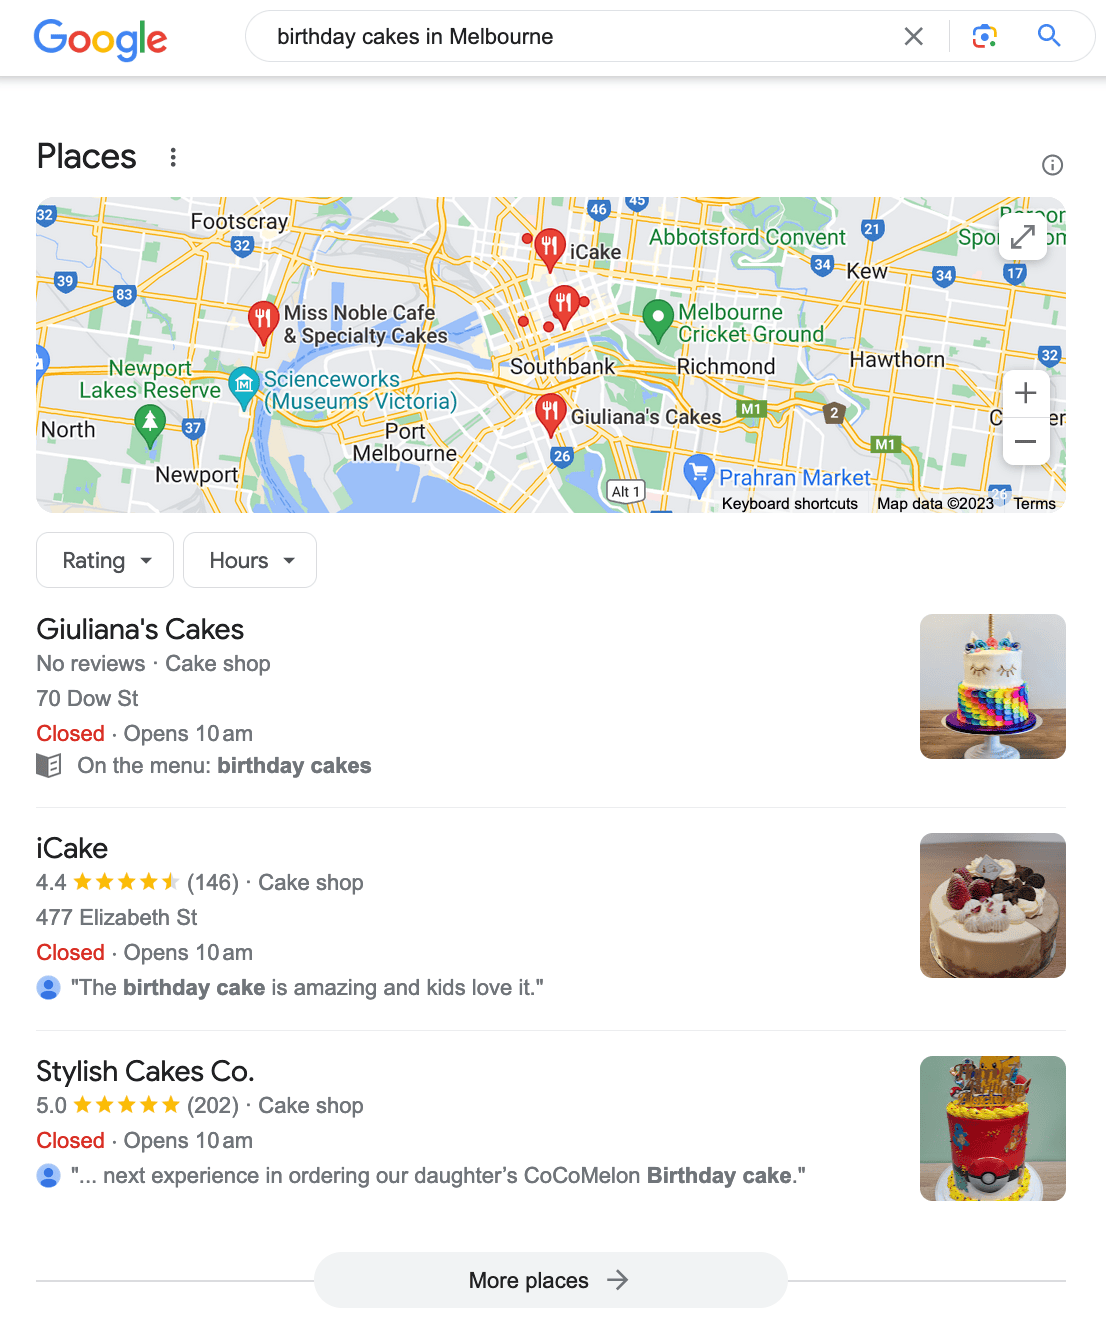 Google local pack results for “birthday cakes in Melbourne”